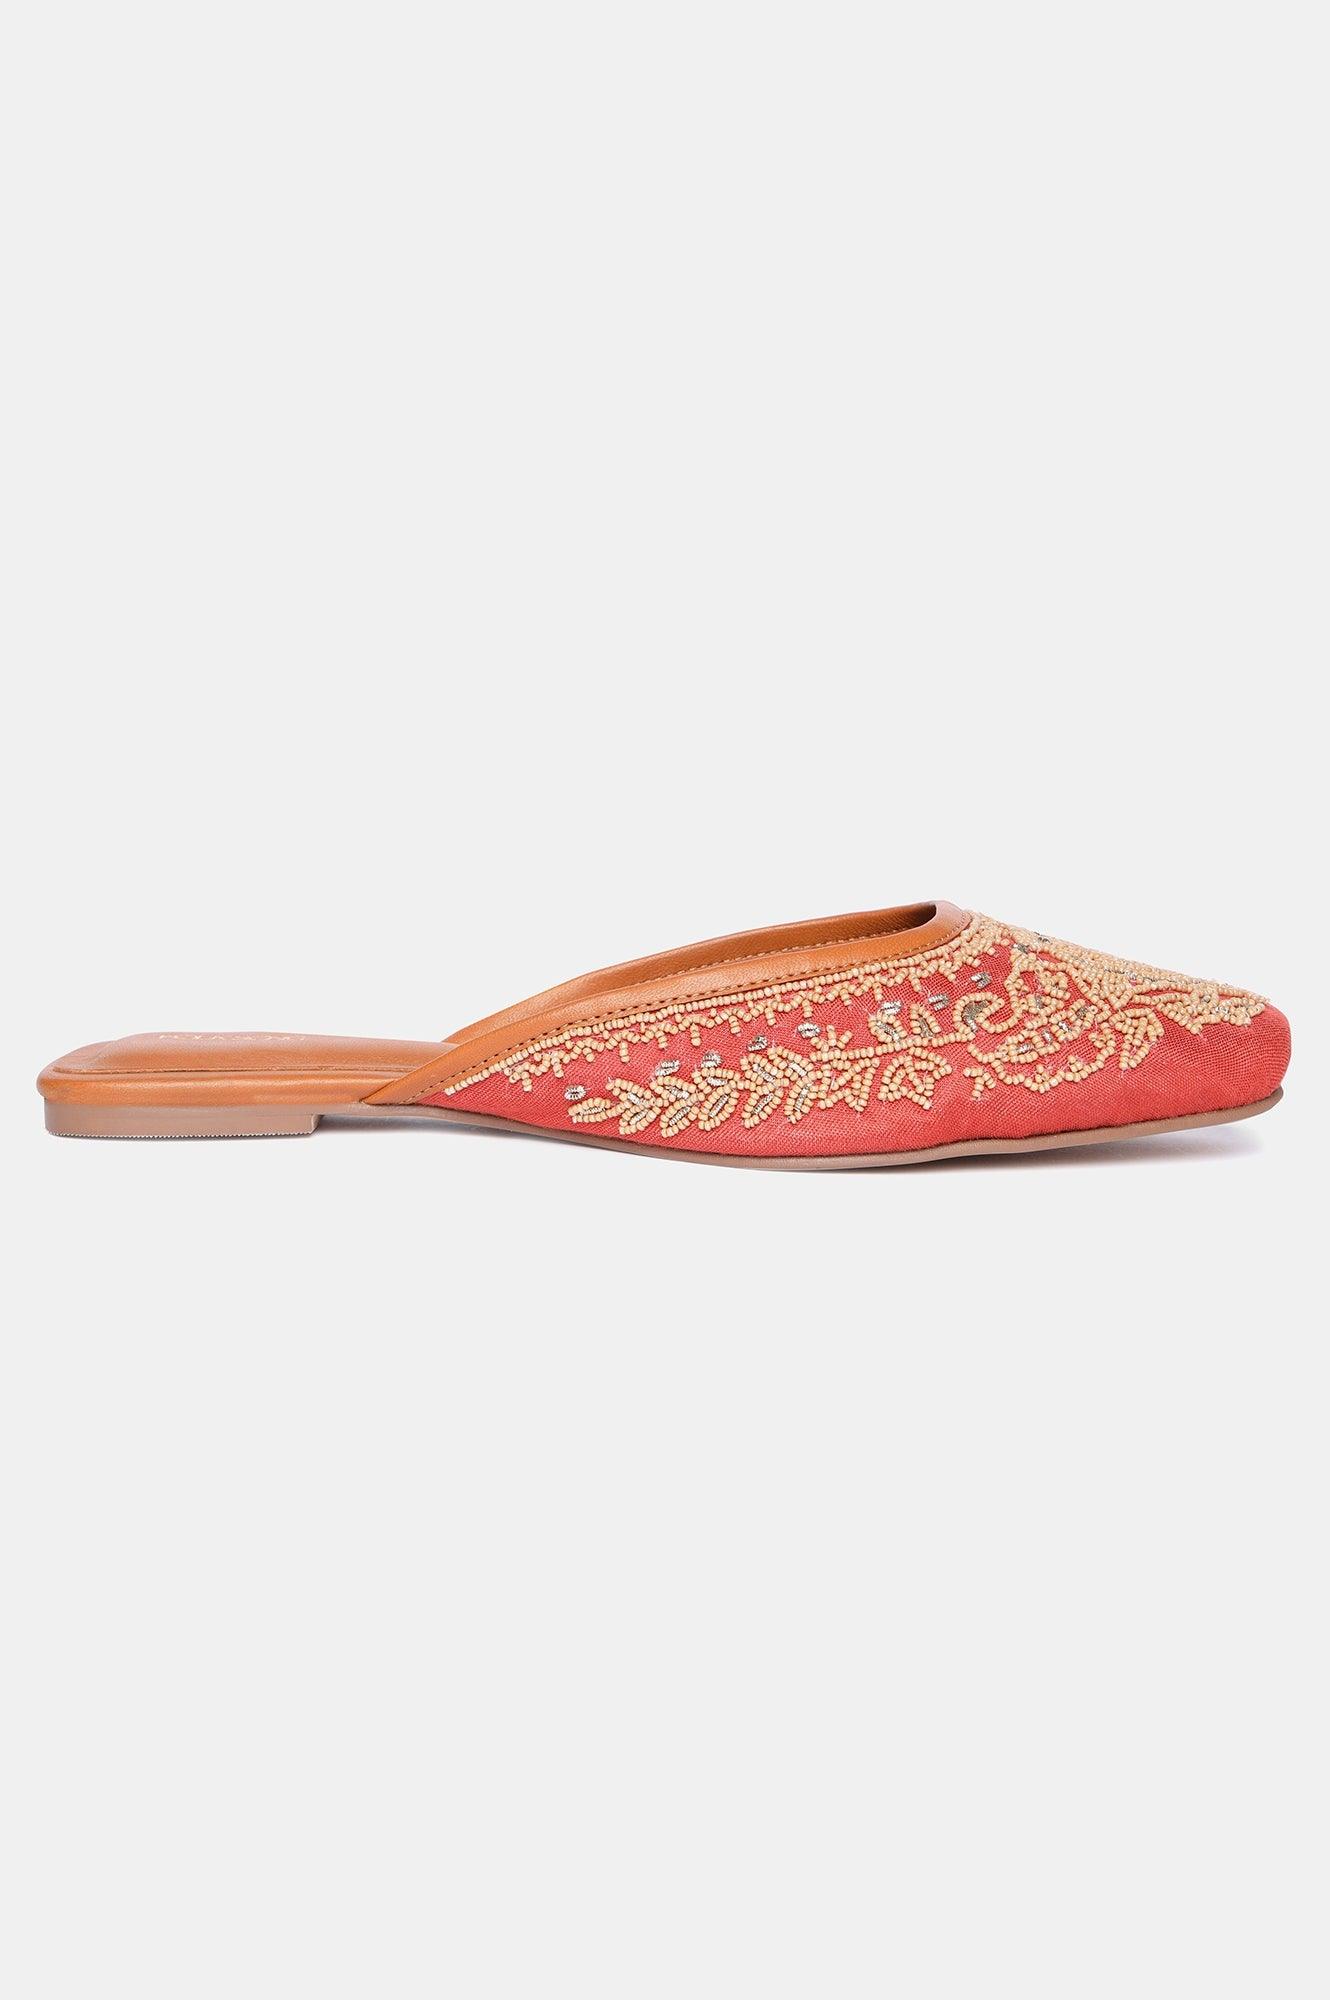 Rust Square Toe Embroidered Flat-Snazish - wforwoman